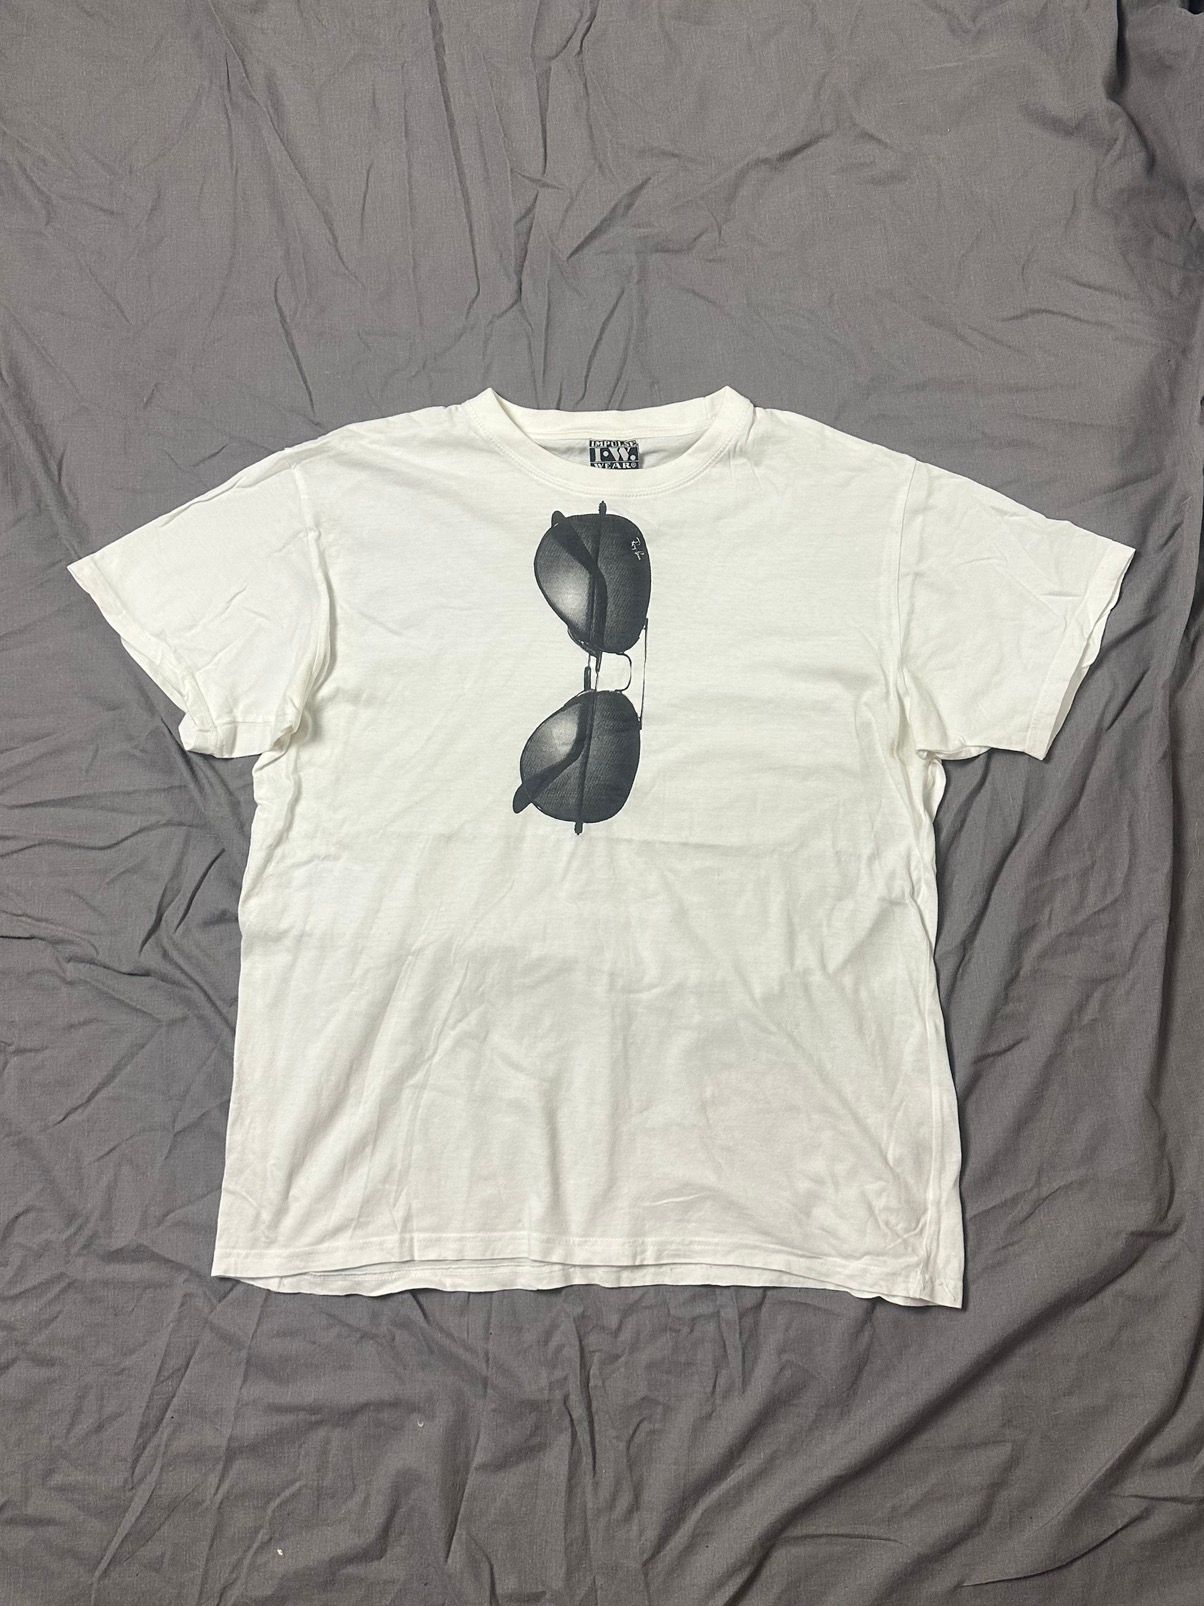 Pre-owned Crazy Shirts X Vintage 2000s Tee Ray Ban Glasses In White